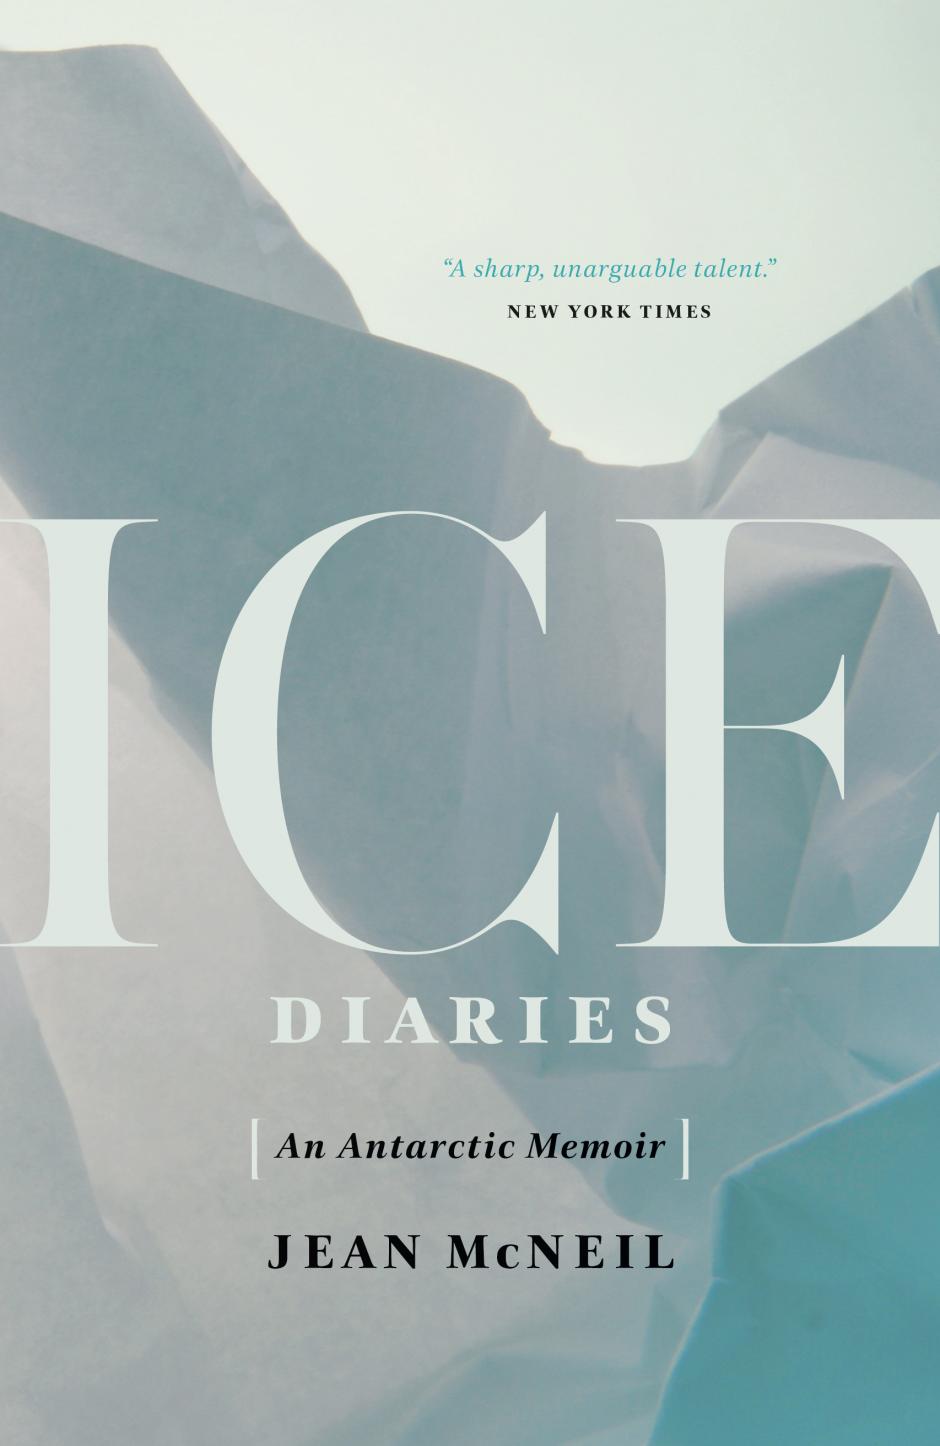 Ice Diaries by Jean McNeil